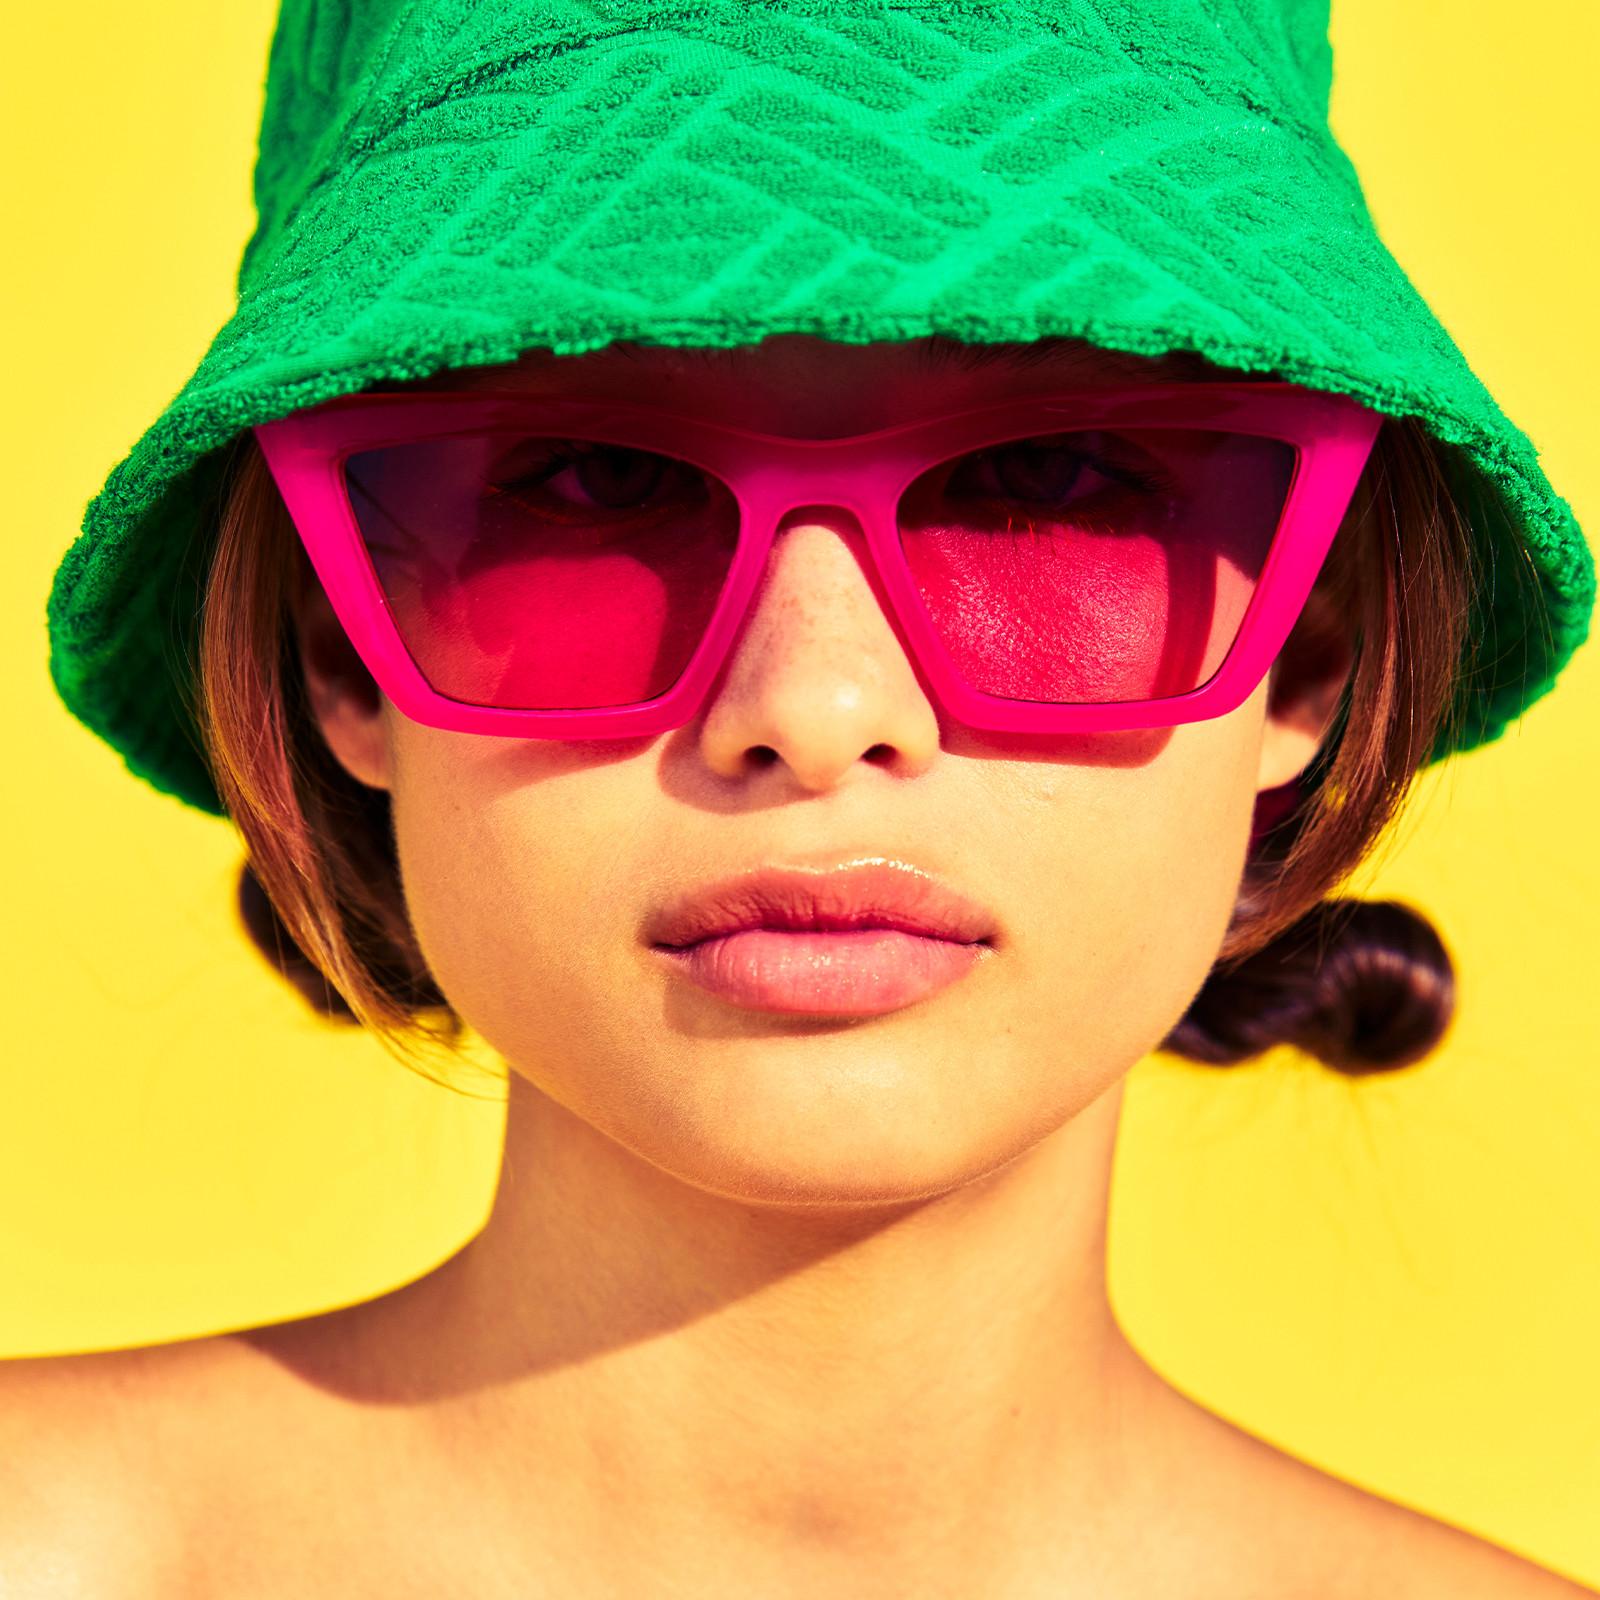 Model wears green bucket hat and pink sunglasses